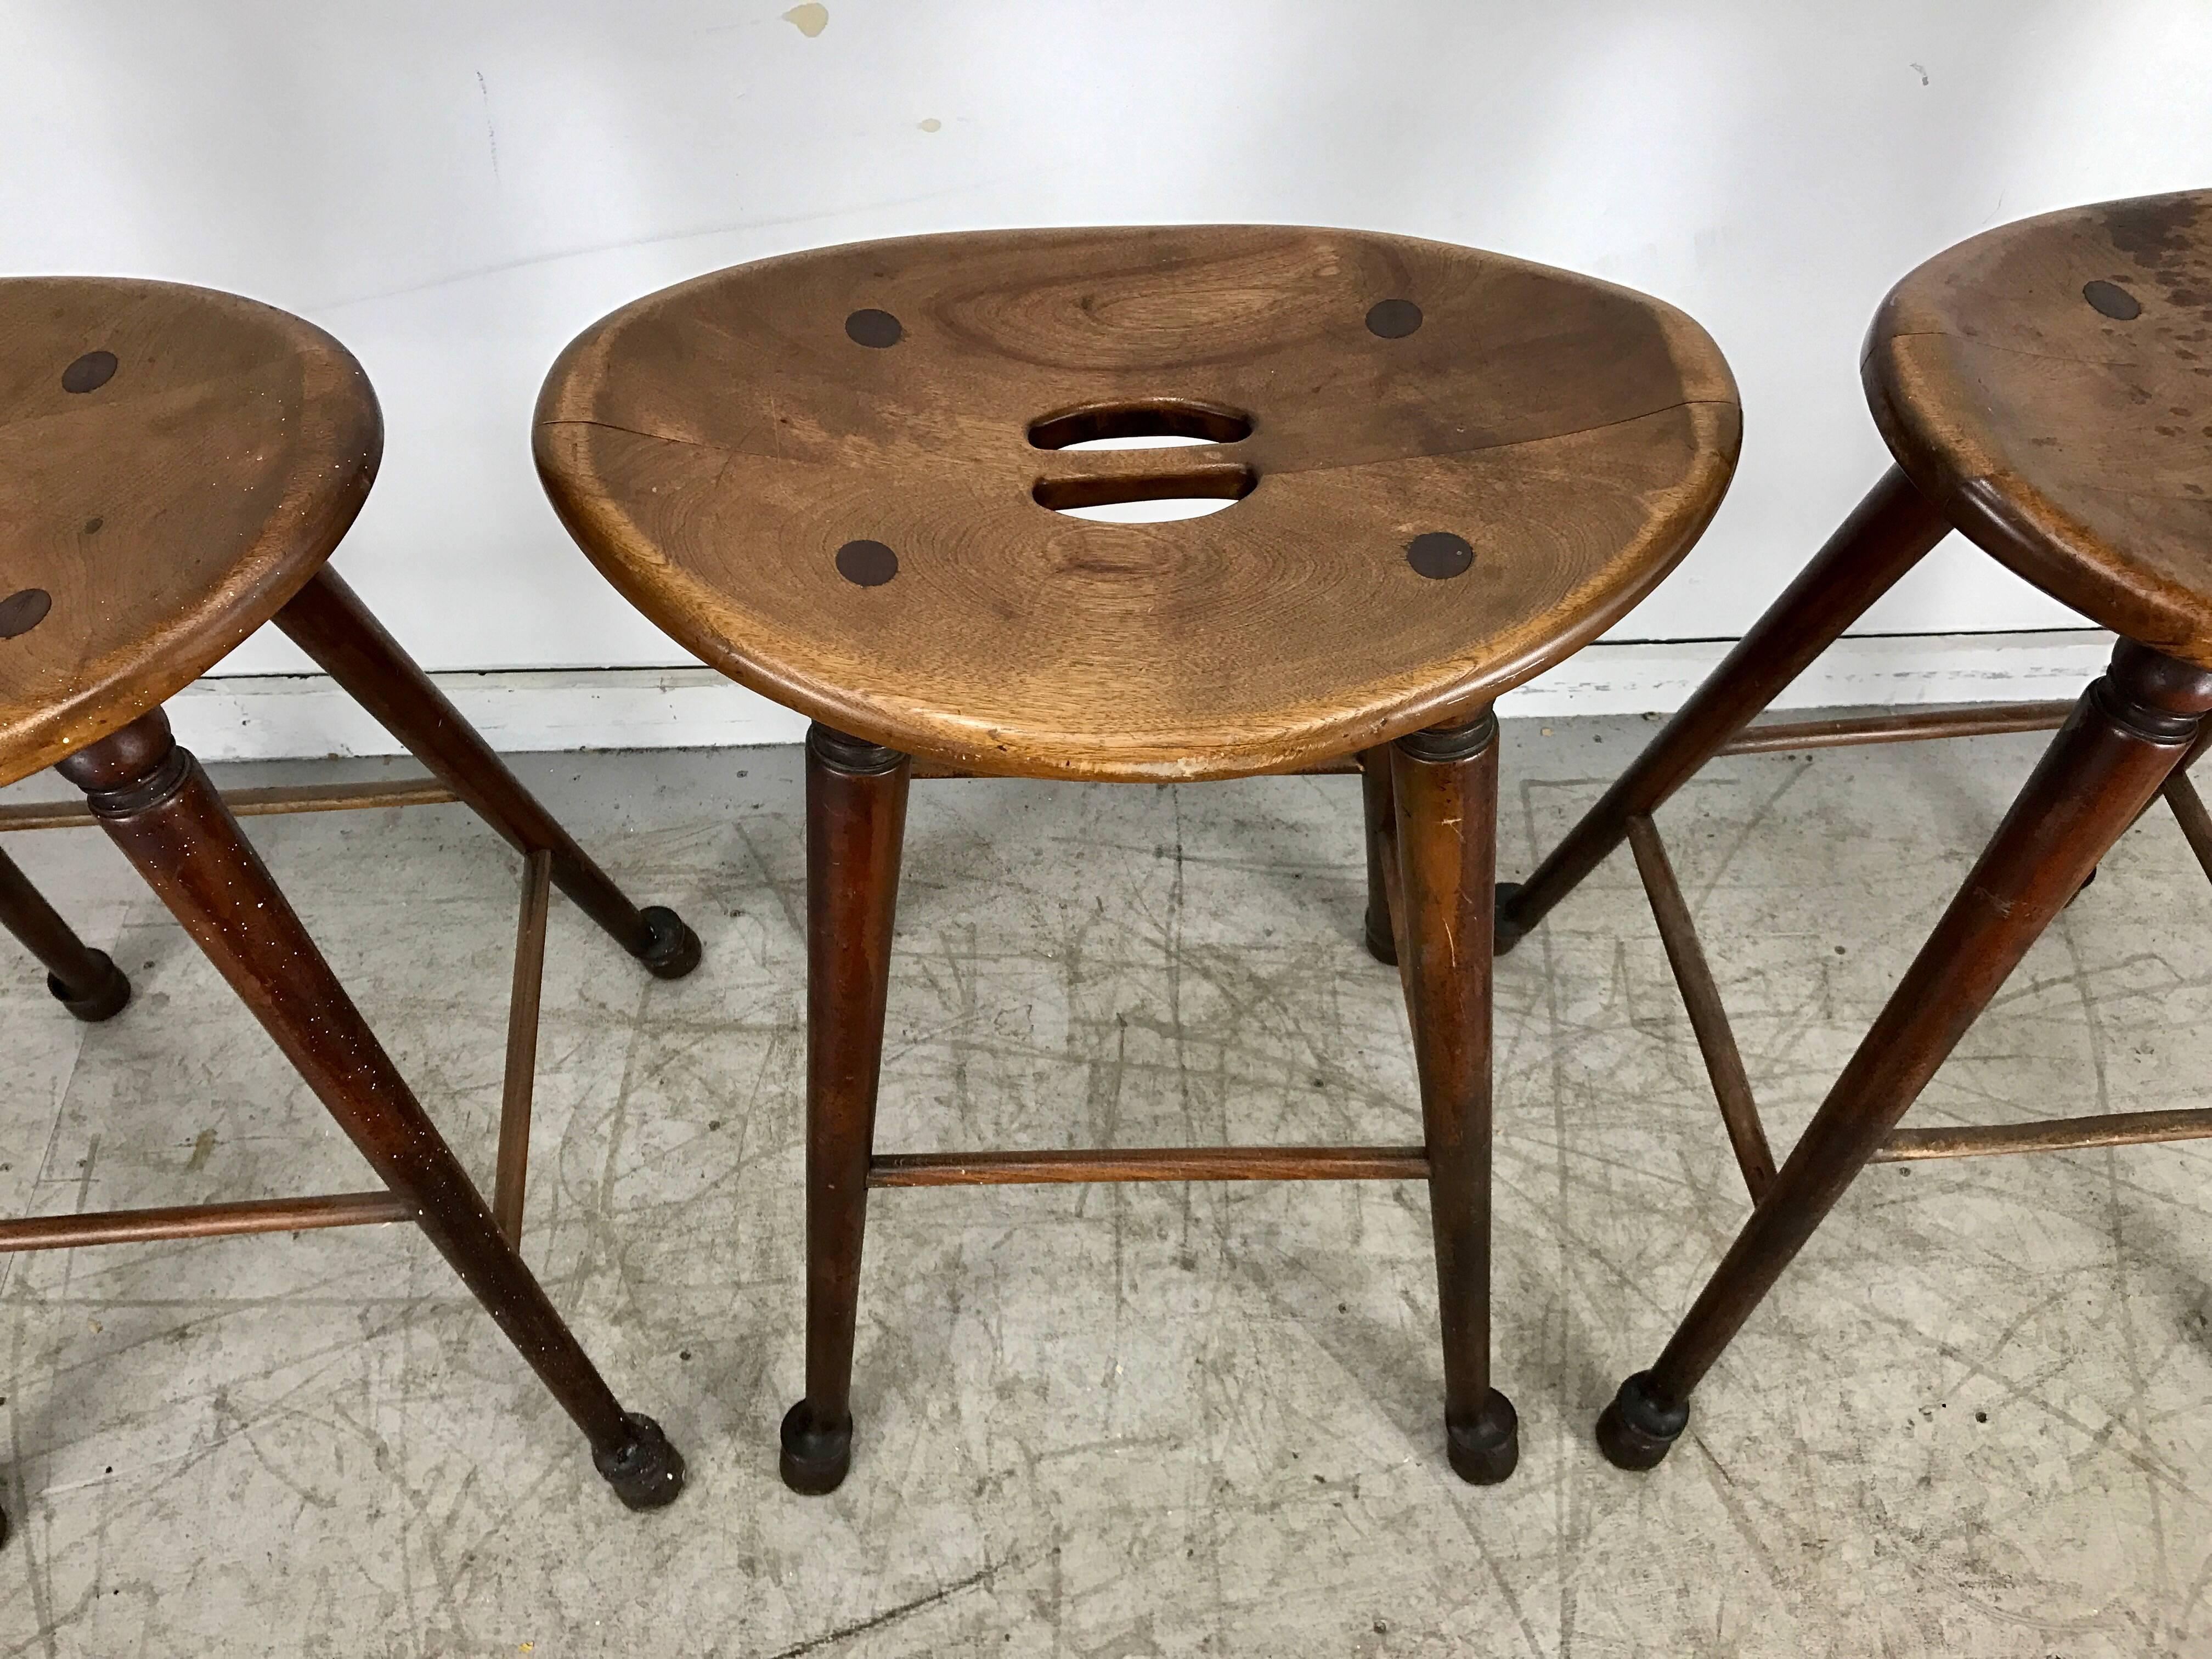 American Craftsman Unusual Set of Three Antique Hooved Saloon Stools Bar or Counter Cowboy Modern